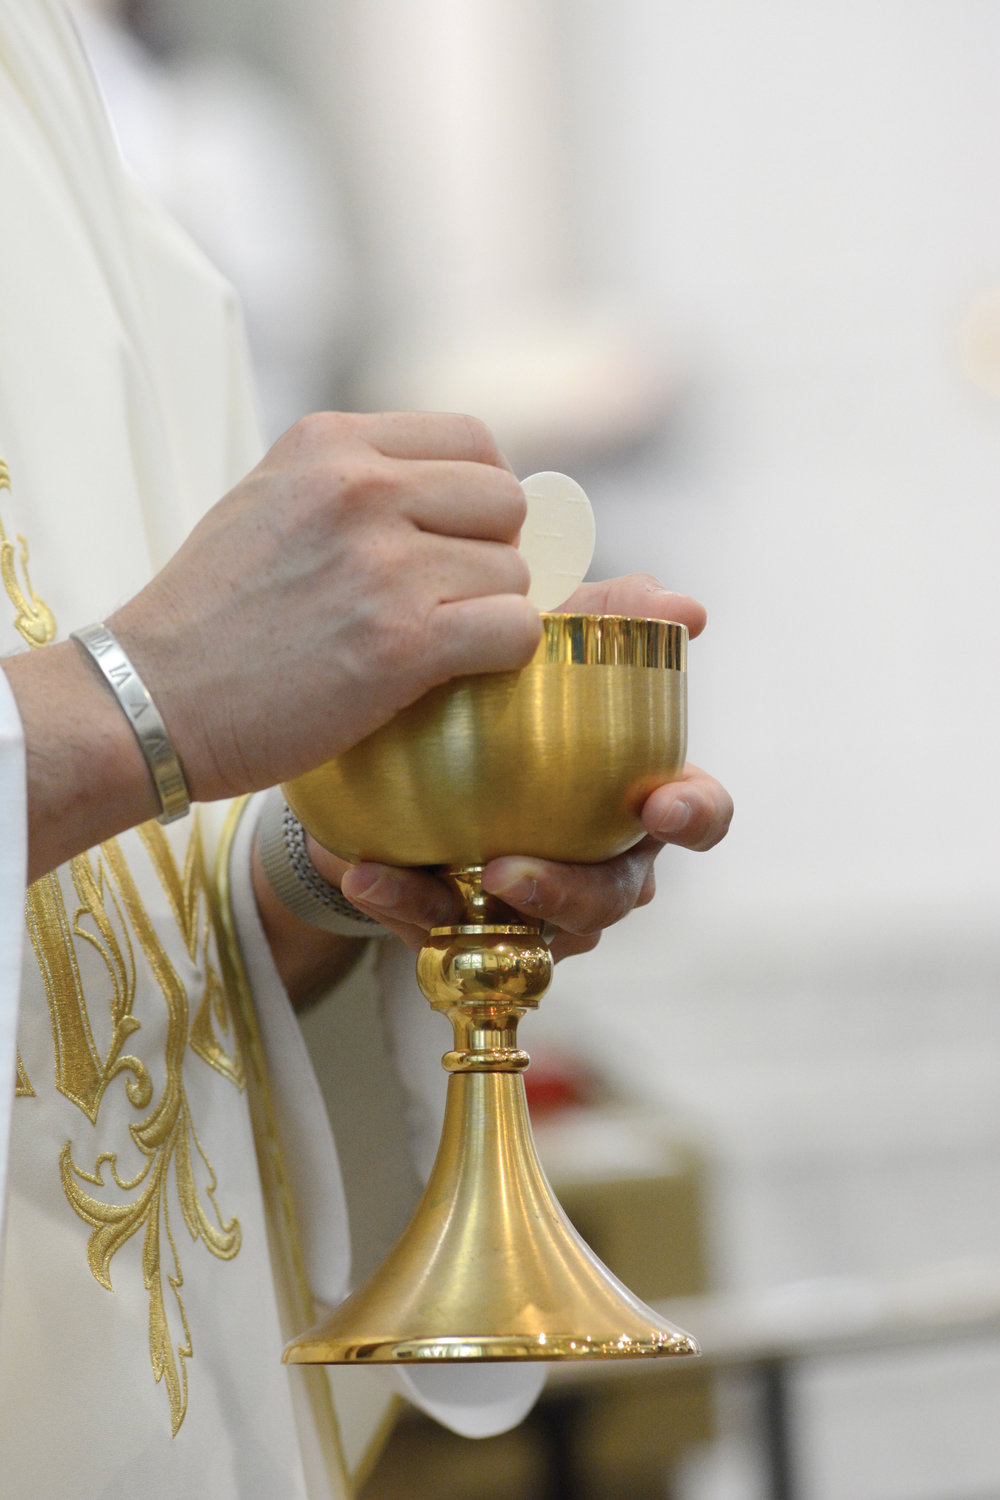 We know that God hears our prayers 
all the time, but when we have just 
received Him, He is especially close. 
Our thanksgiving after receiving 
Holy Communion is an important time for 
prayer that certainly could be enhanced.